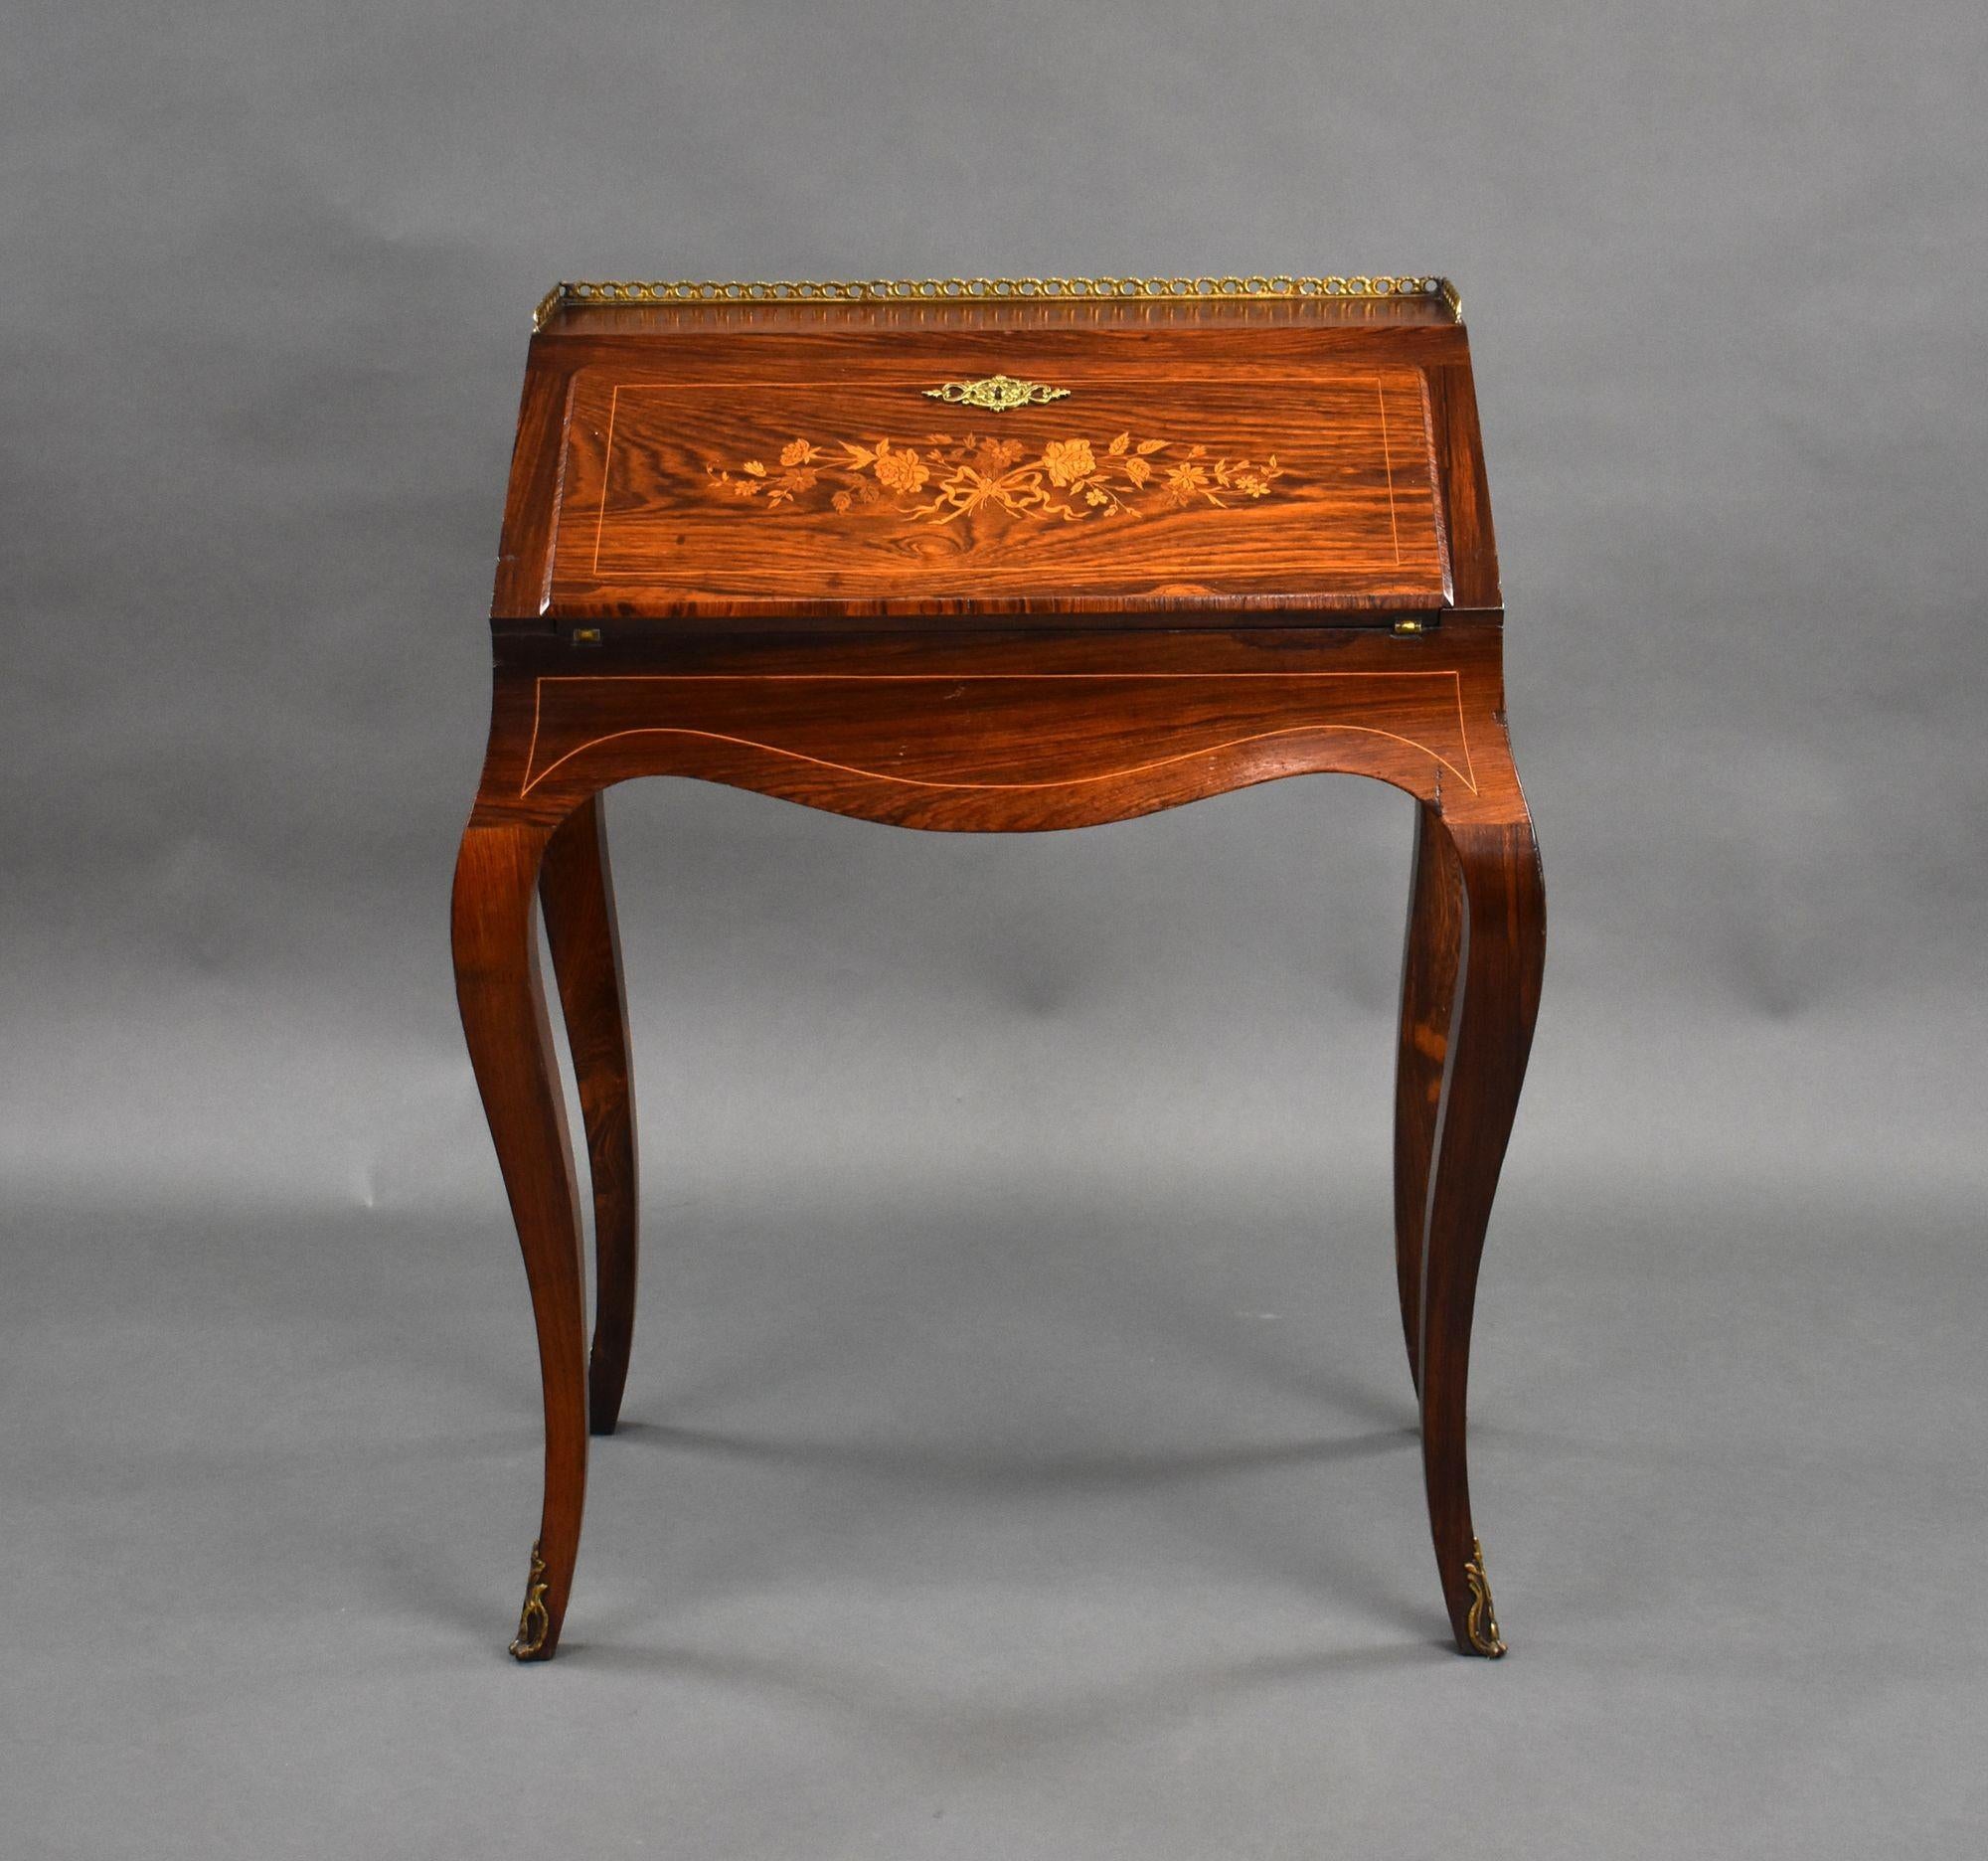 For sale is a good quality French rosewood Bureau De Dame. The top of the bureau has a nice brass gallery above a fall front, decoratively inlaid with marquetry, opening to reveal a fitted interior consisting of two drawers, a baise writing surface